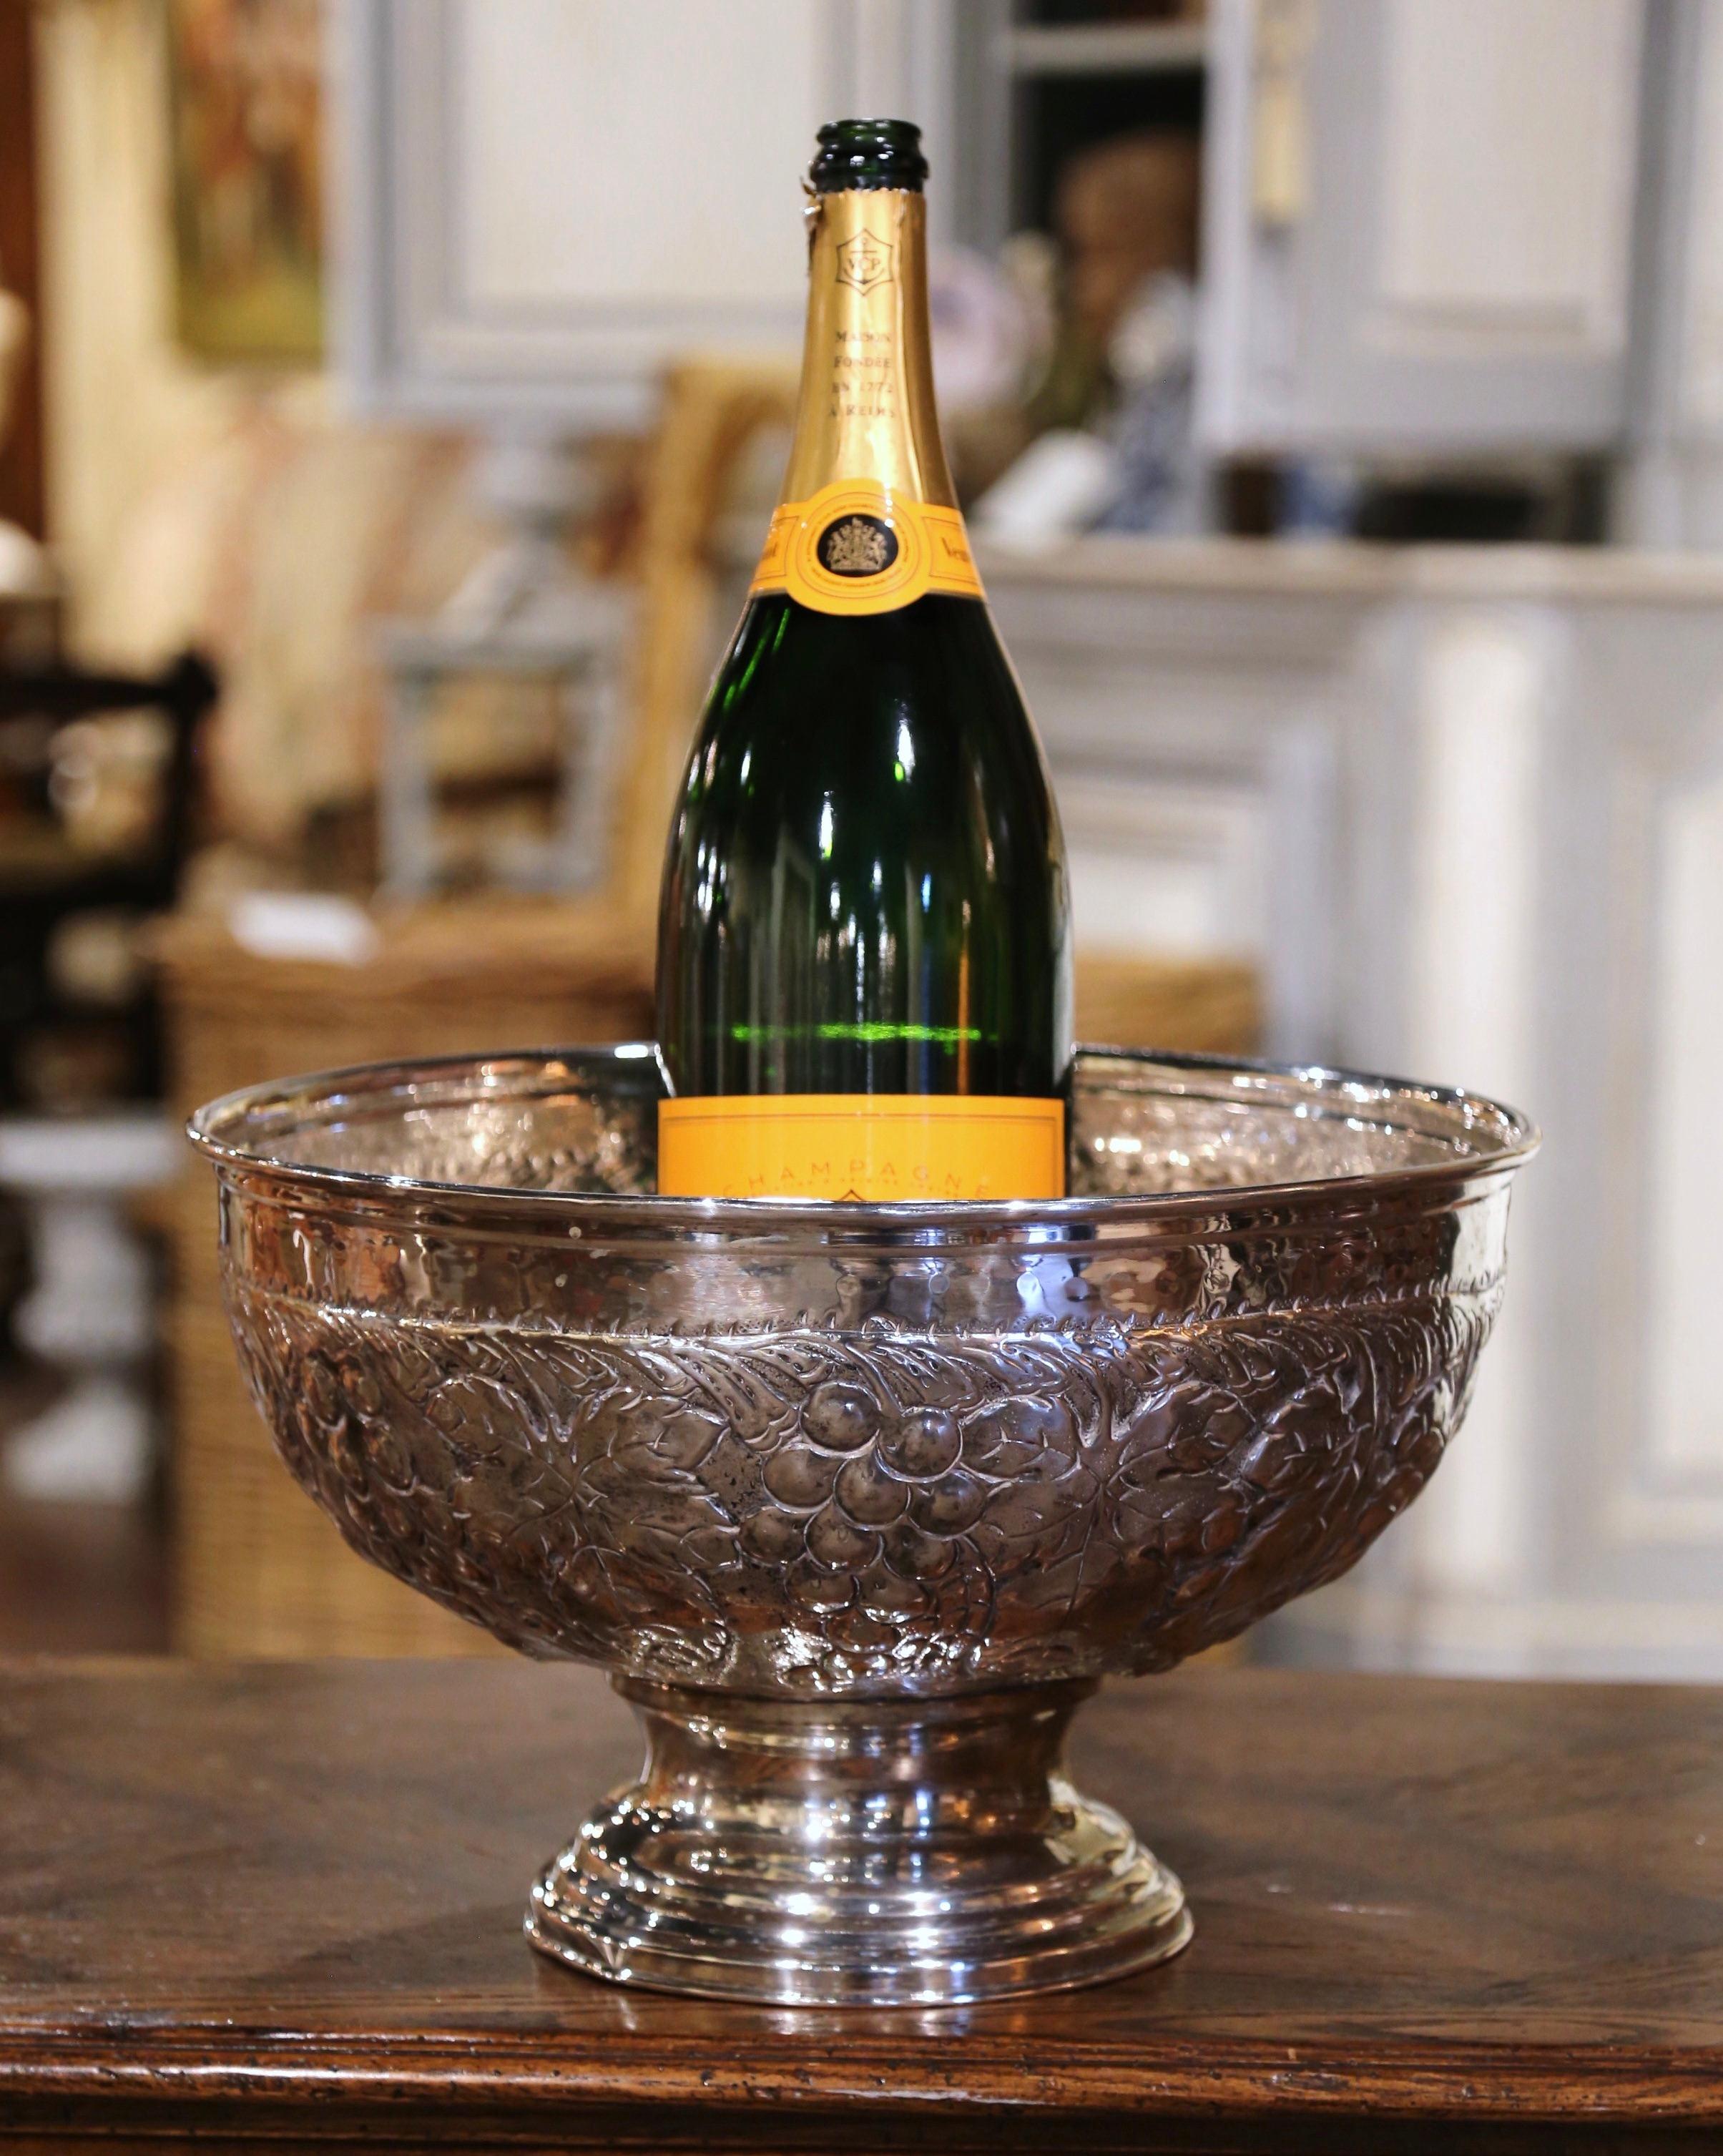 Chill your favorite Sauvignon Blanc or Veuve Clicquot in style in this elegant cooler bucket! Crafted in France circa 1970 and circular in shape, the bowl features intricate repousse grape and vine motifs throughout. An additional pierced tray with